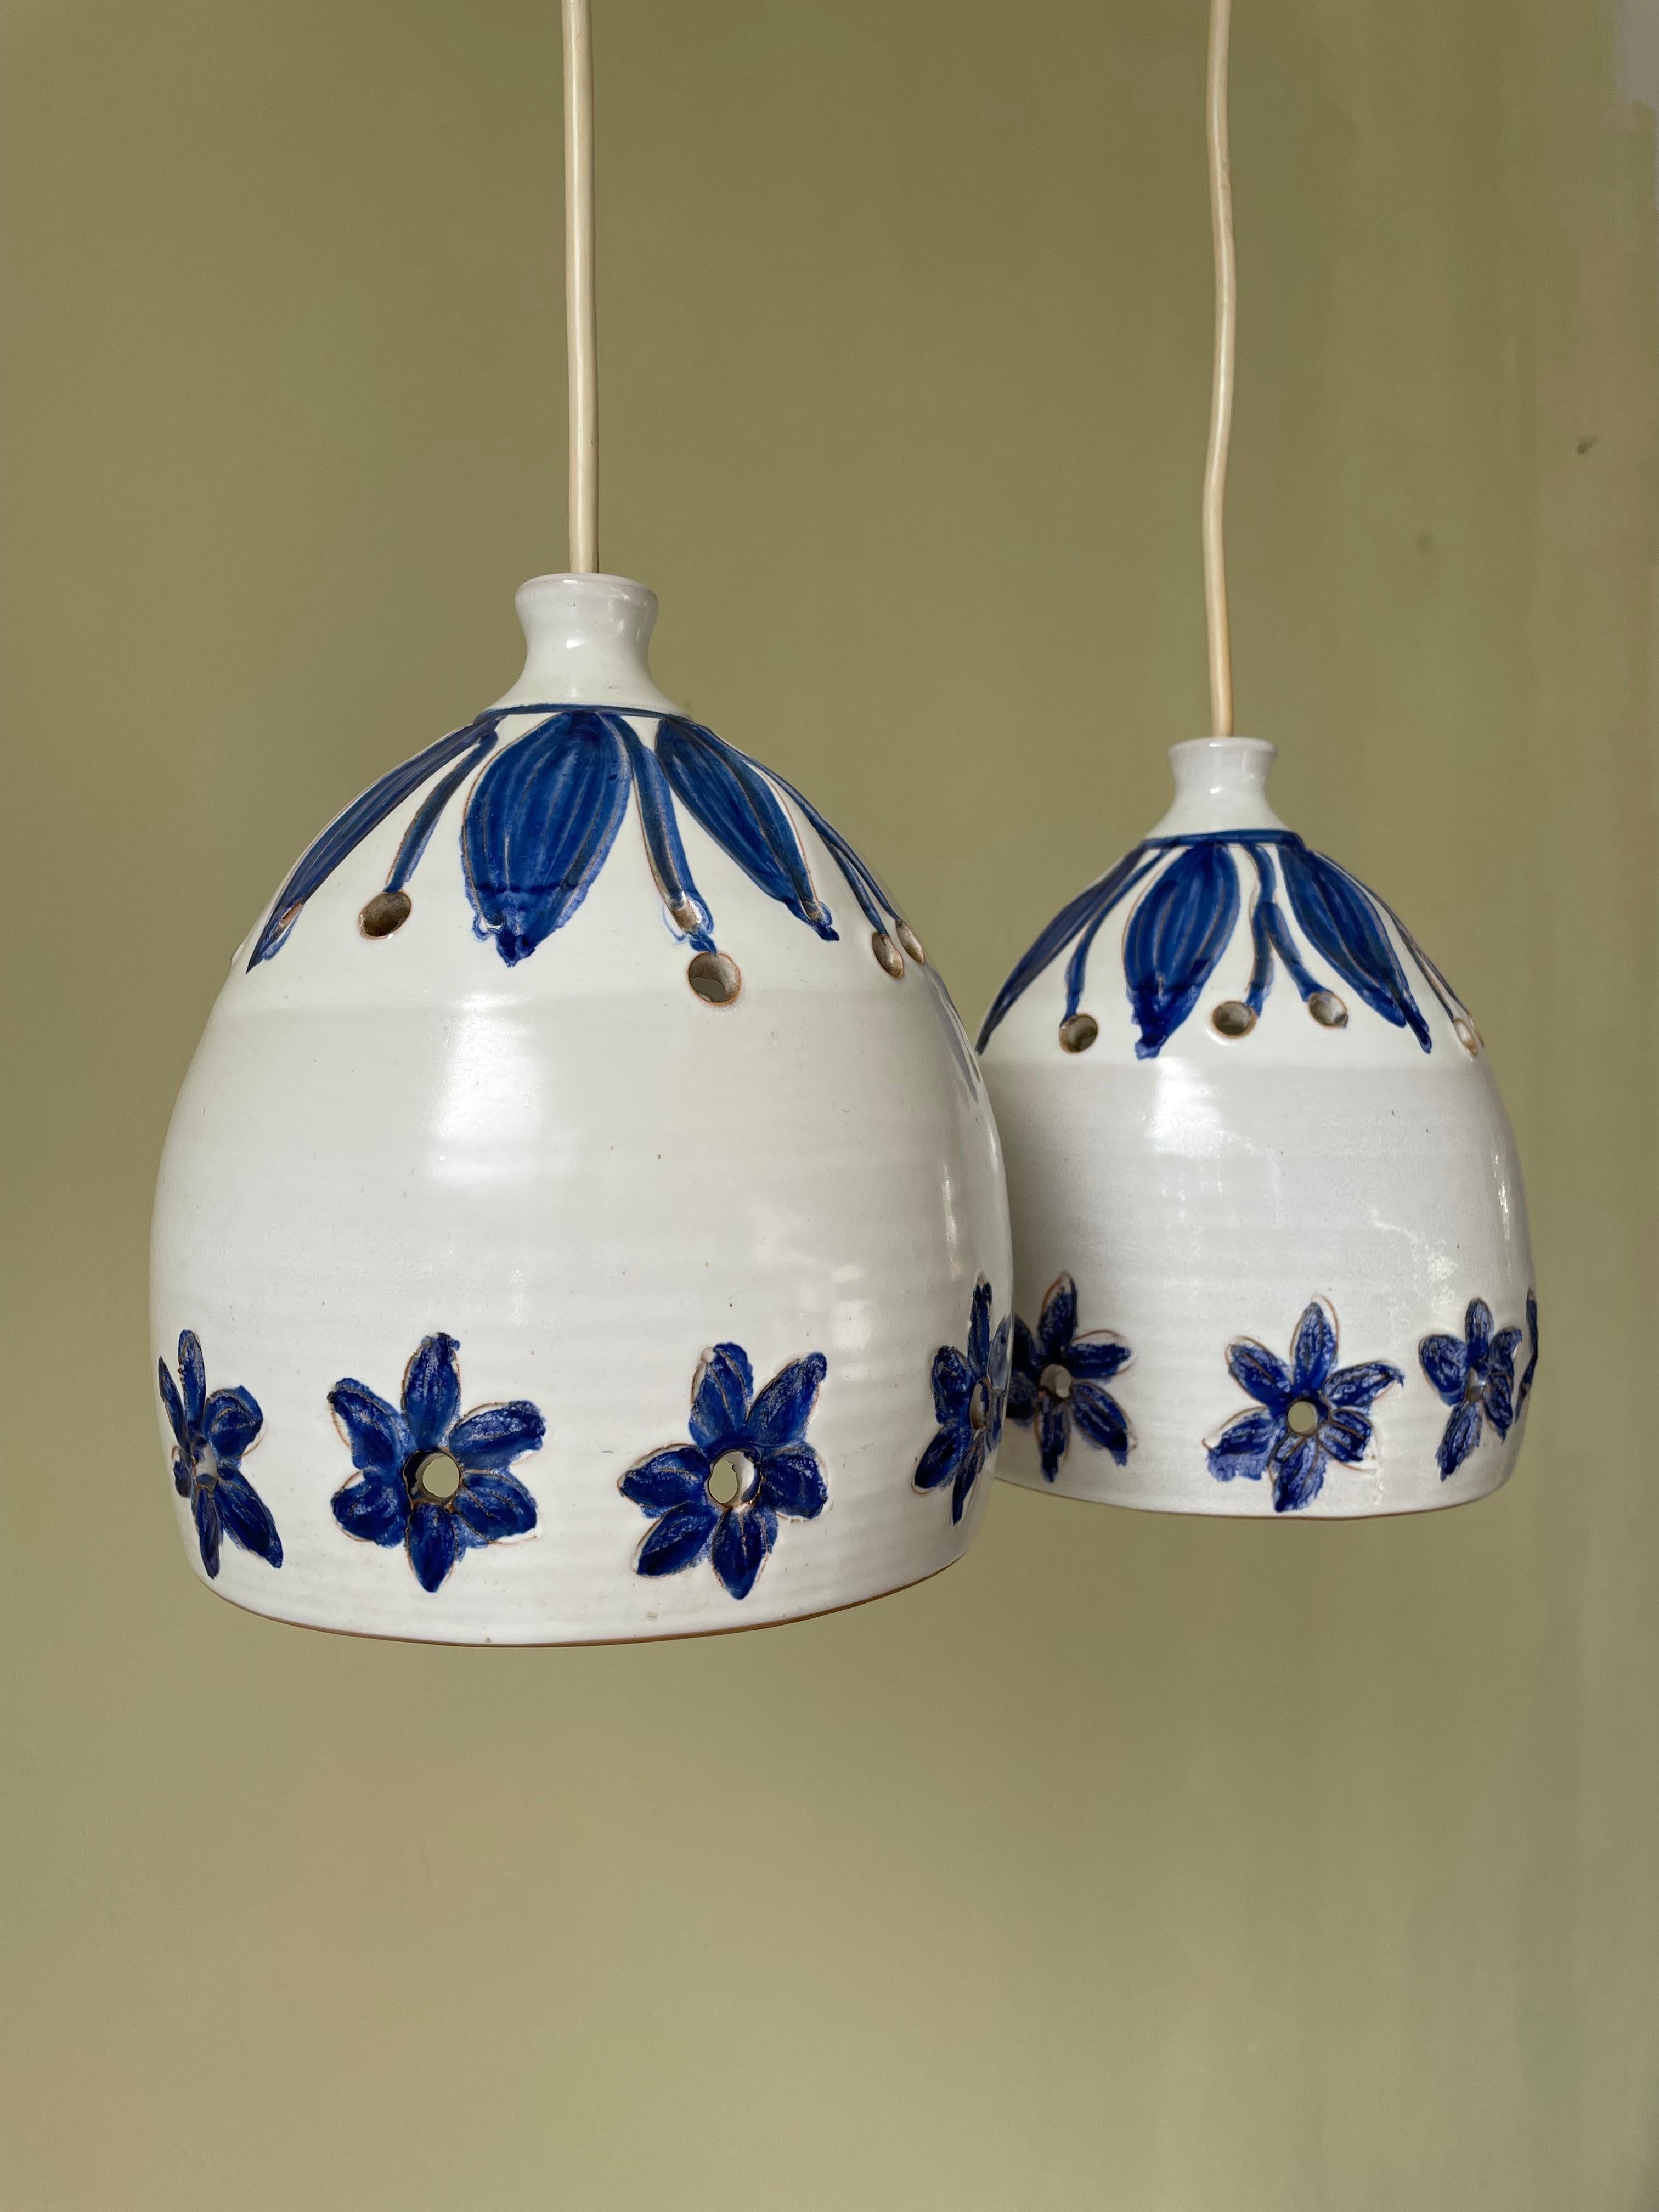 Set of two handmade organic midcentury modern ceramic pendants glazed white with hand-carved and hand-painted blue flowers and leaves. Circular perforations along the top and bottom to let the light out. Shiny white glaze on the inside, raw bottom